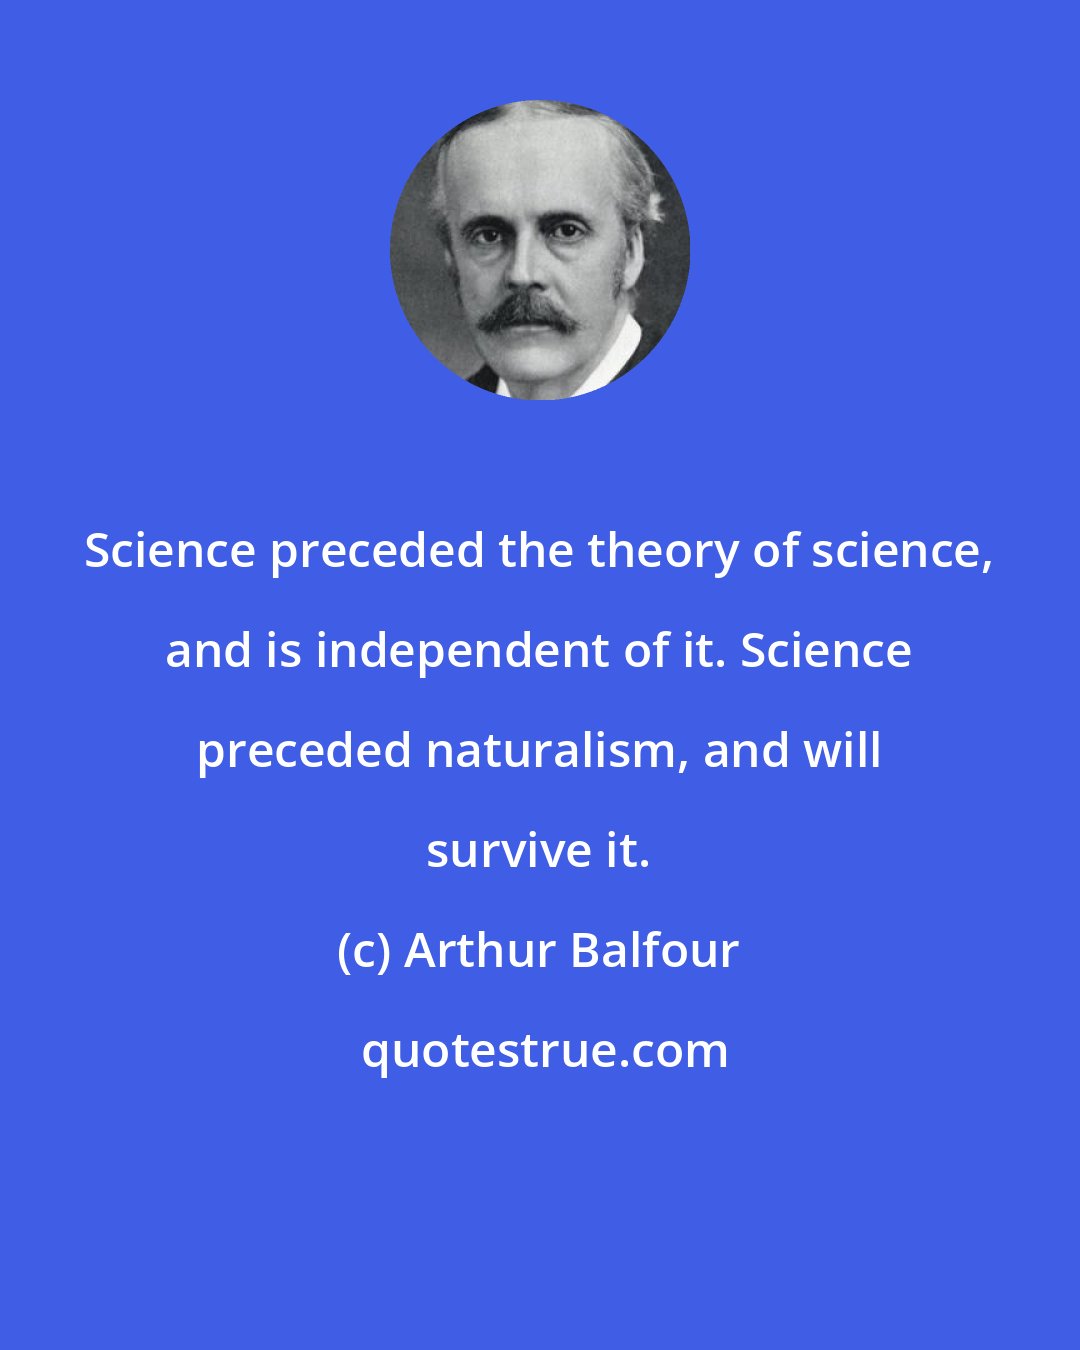 Arthur Balfour: Science preceded the theory of science, and is independent of it. Science preceded naturalism, and will survive it.